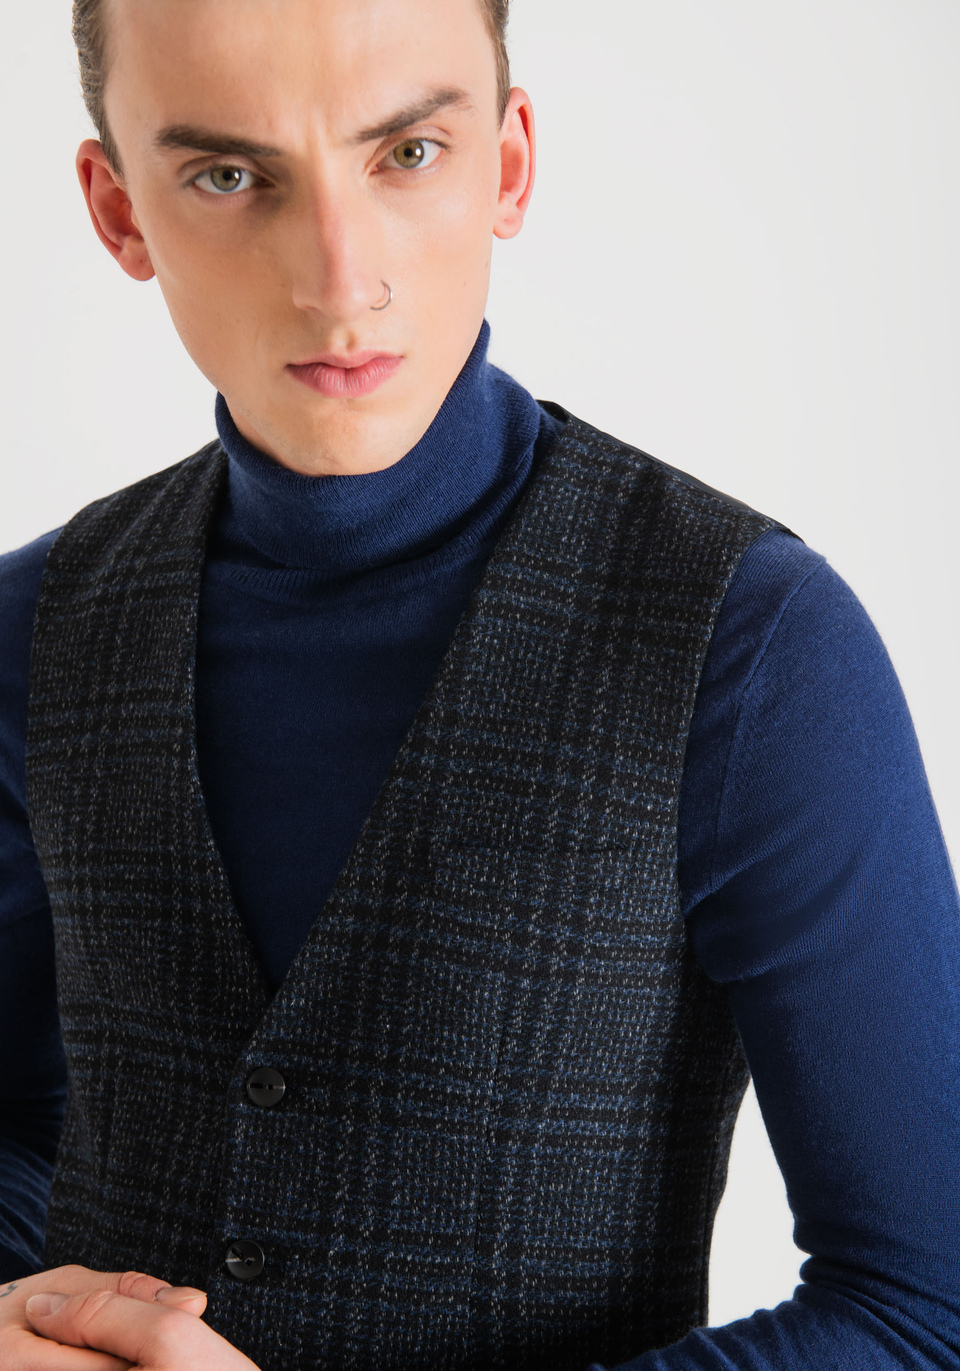 SLIM FIT WAISTCOAT IN SOFT WOOL BLEND FABRIC WITH PRINCE OF WALES PATTERN - Antony Morato Online Shop